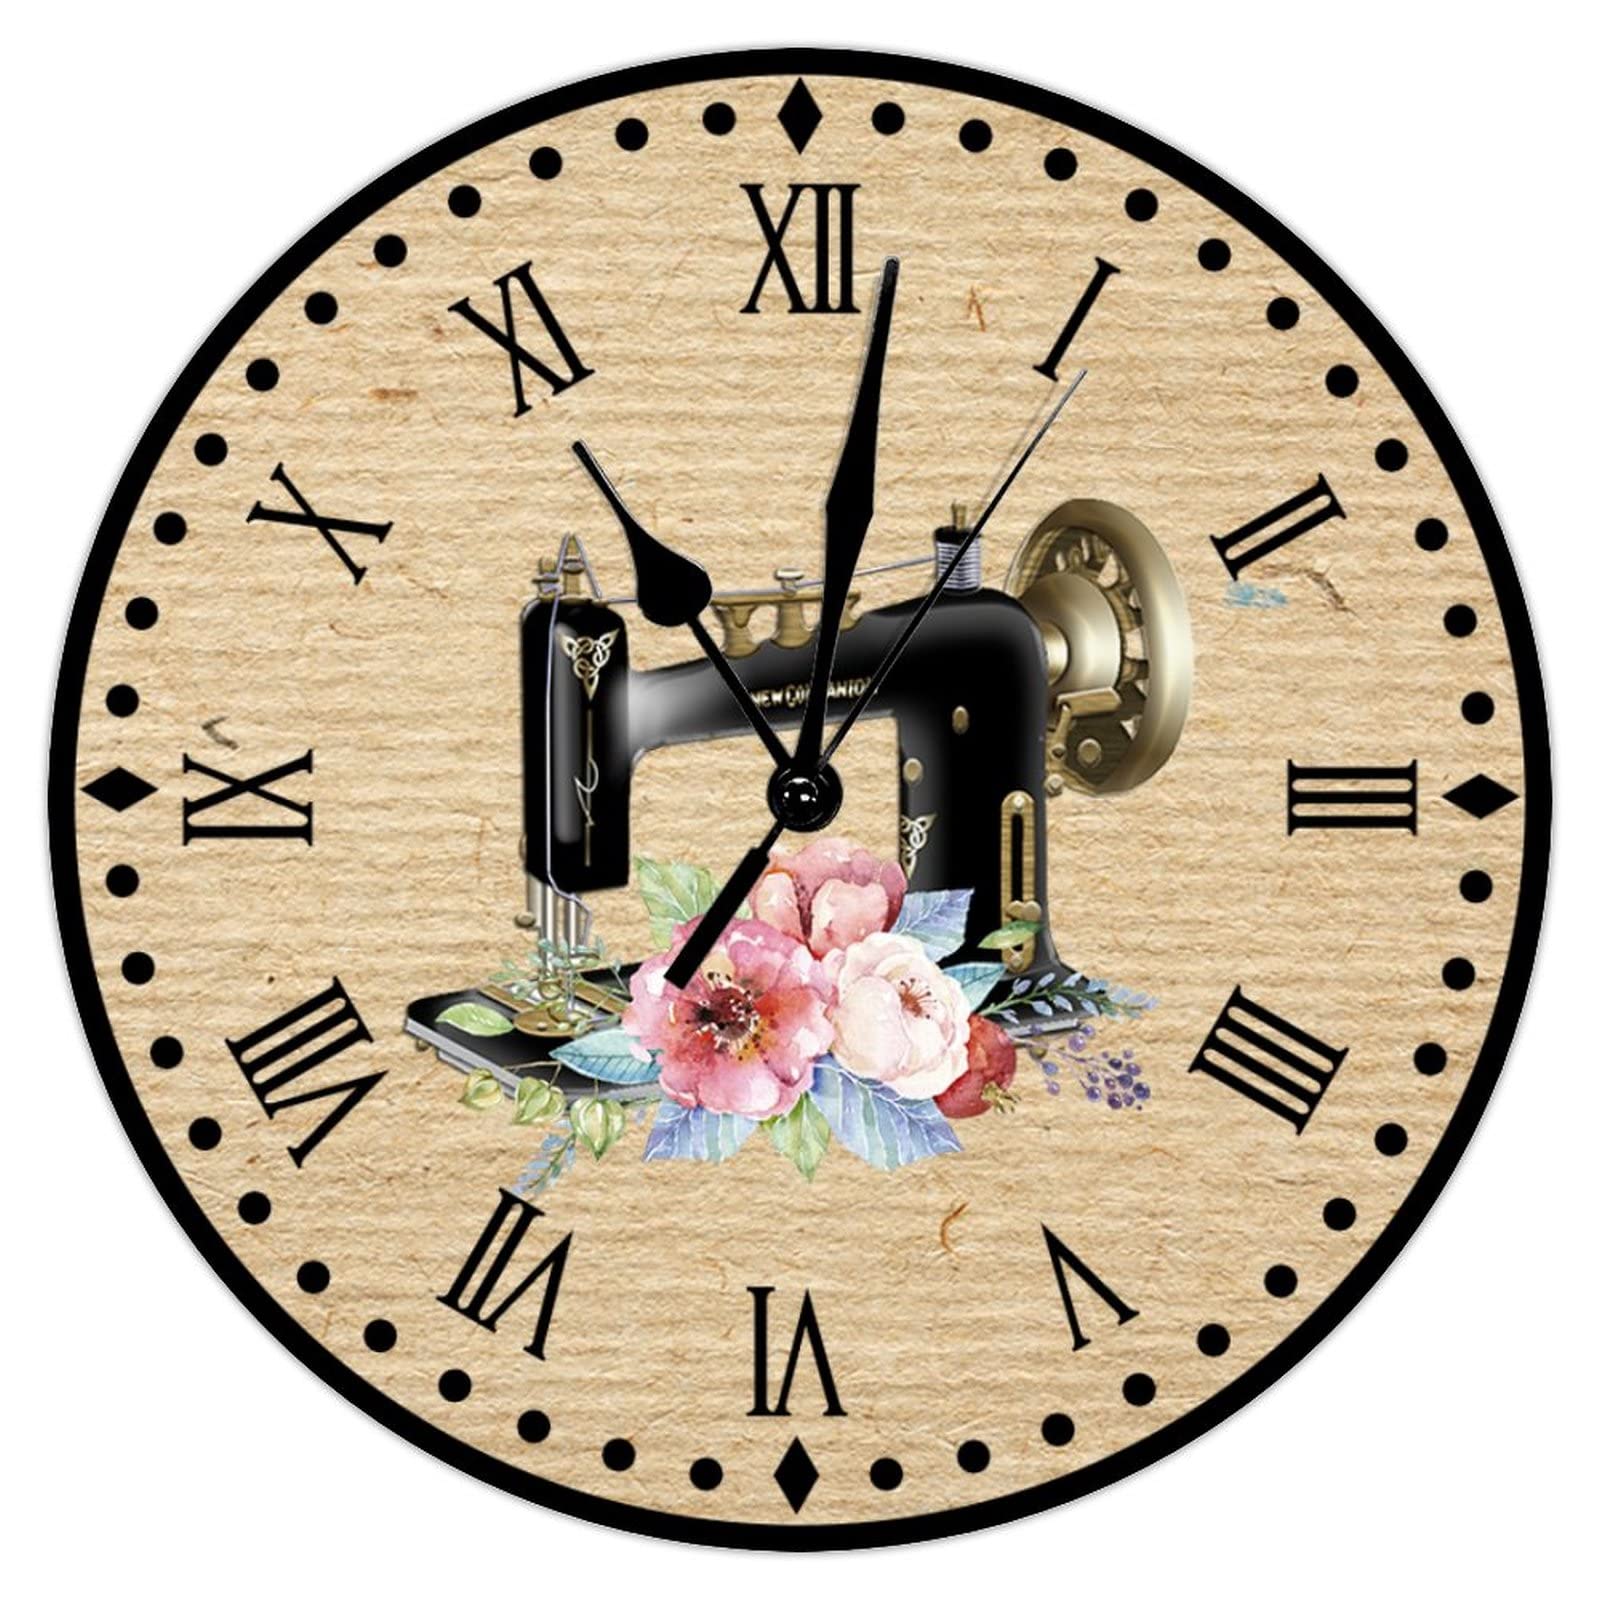 Flower Sewing Machine Wooden Wall Clock Silent Battery Wood Wall Clocks Seamstress Sewing Room Wall Clocks Craft Room Decor Clock Farmhouse Wall Decor 15inch Round Clock for Home Office School